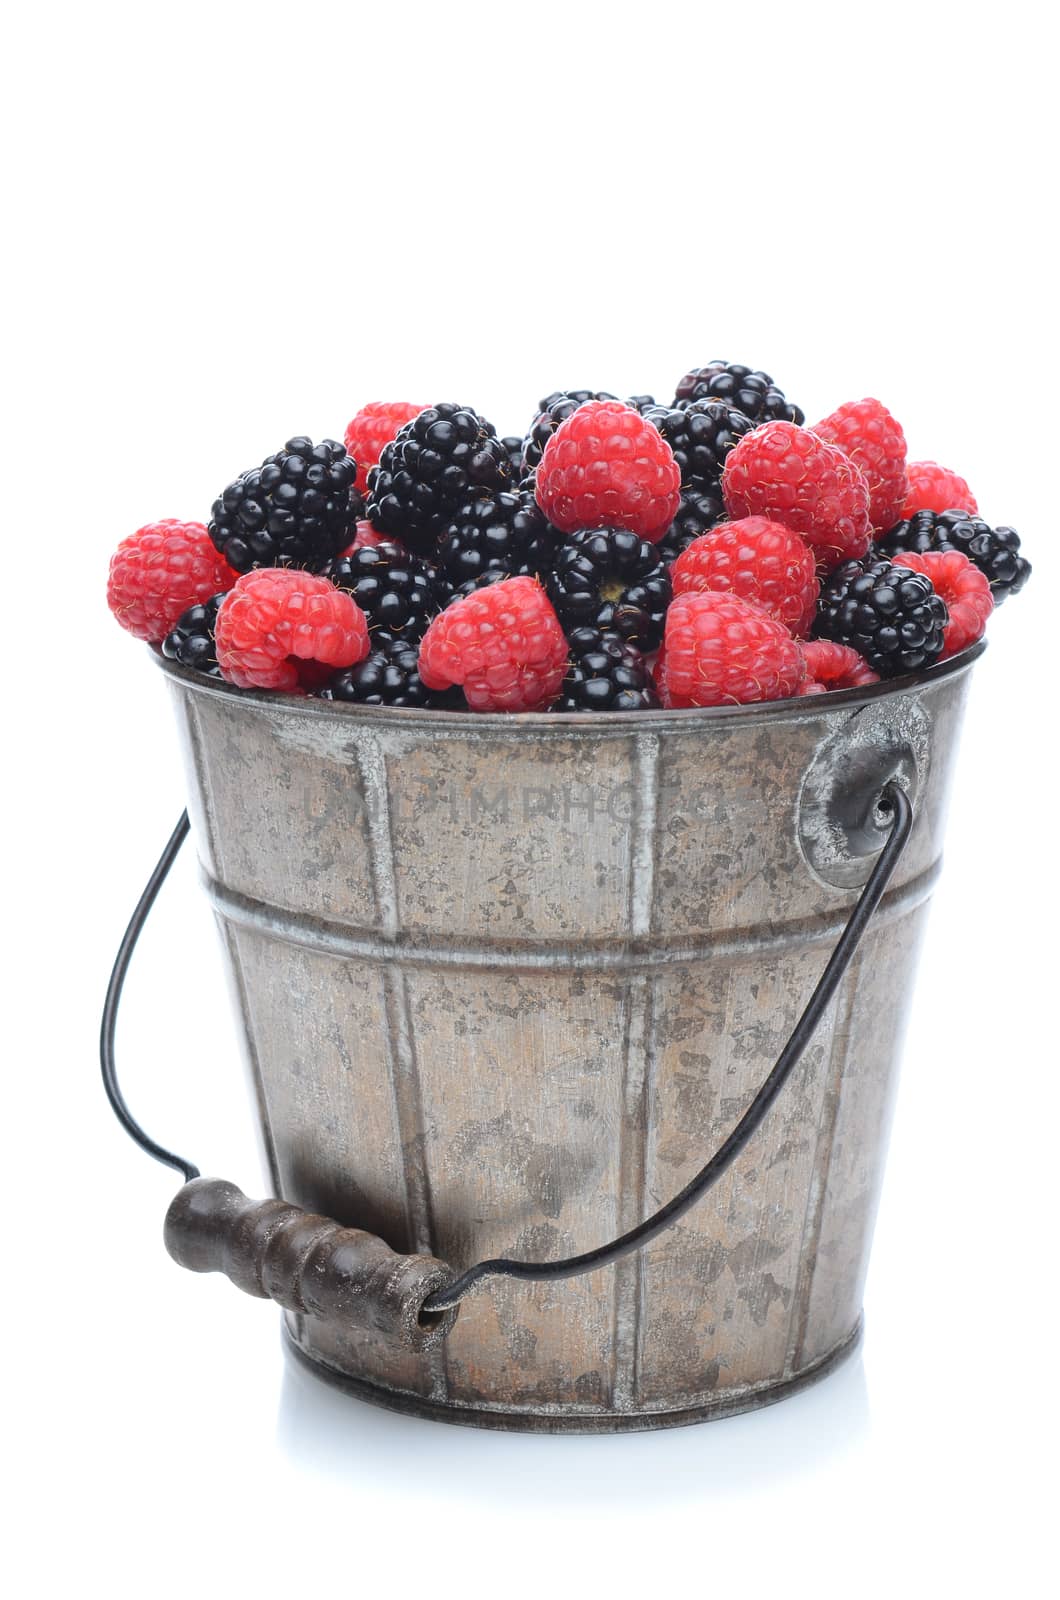 A pail full of freshly picked blackberries and raspberries. Vertical format isolated on a white background with slight reflection.